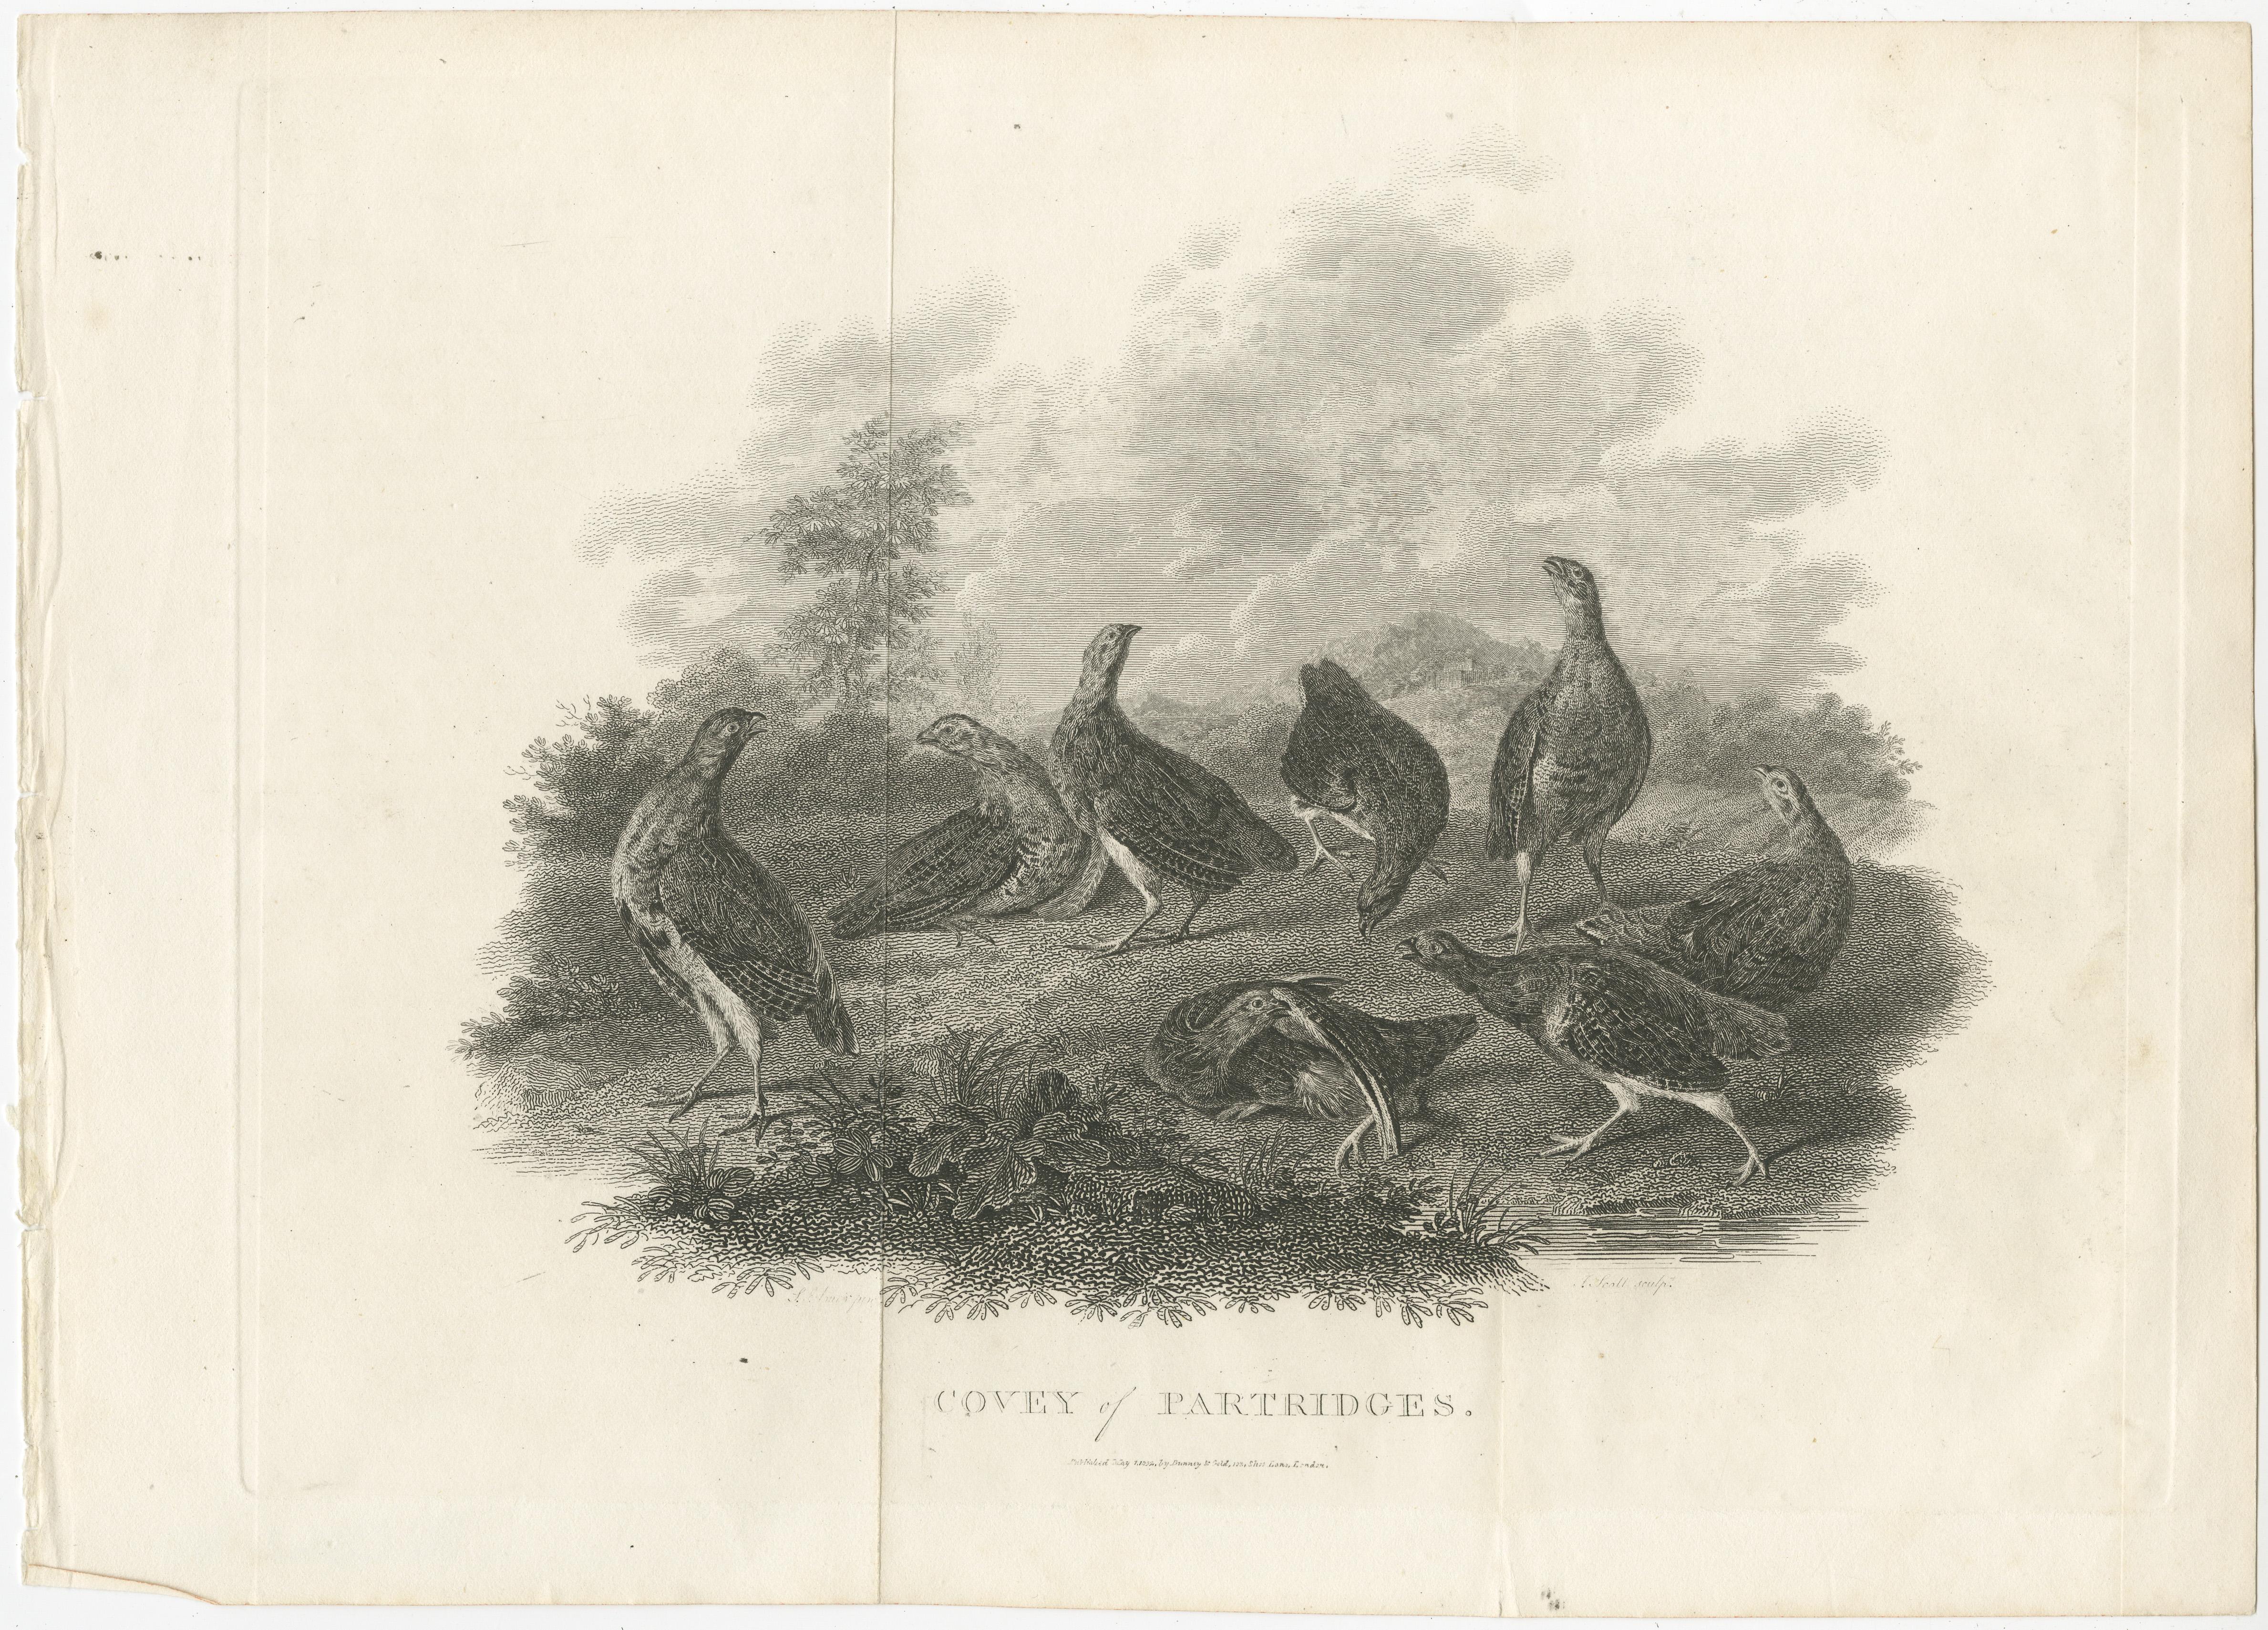 Antique print titled 'Covey of Partridges'. Original antique print of a small group of partridges. After the drawing by N. Drake, 1802, from 